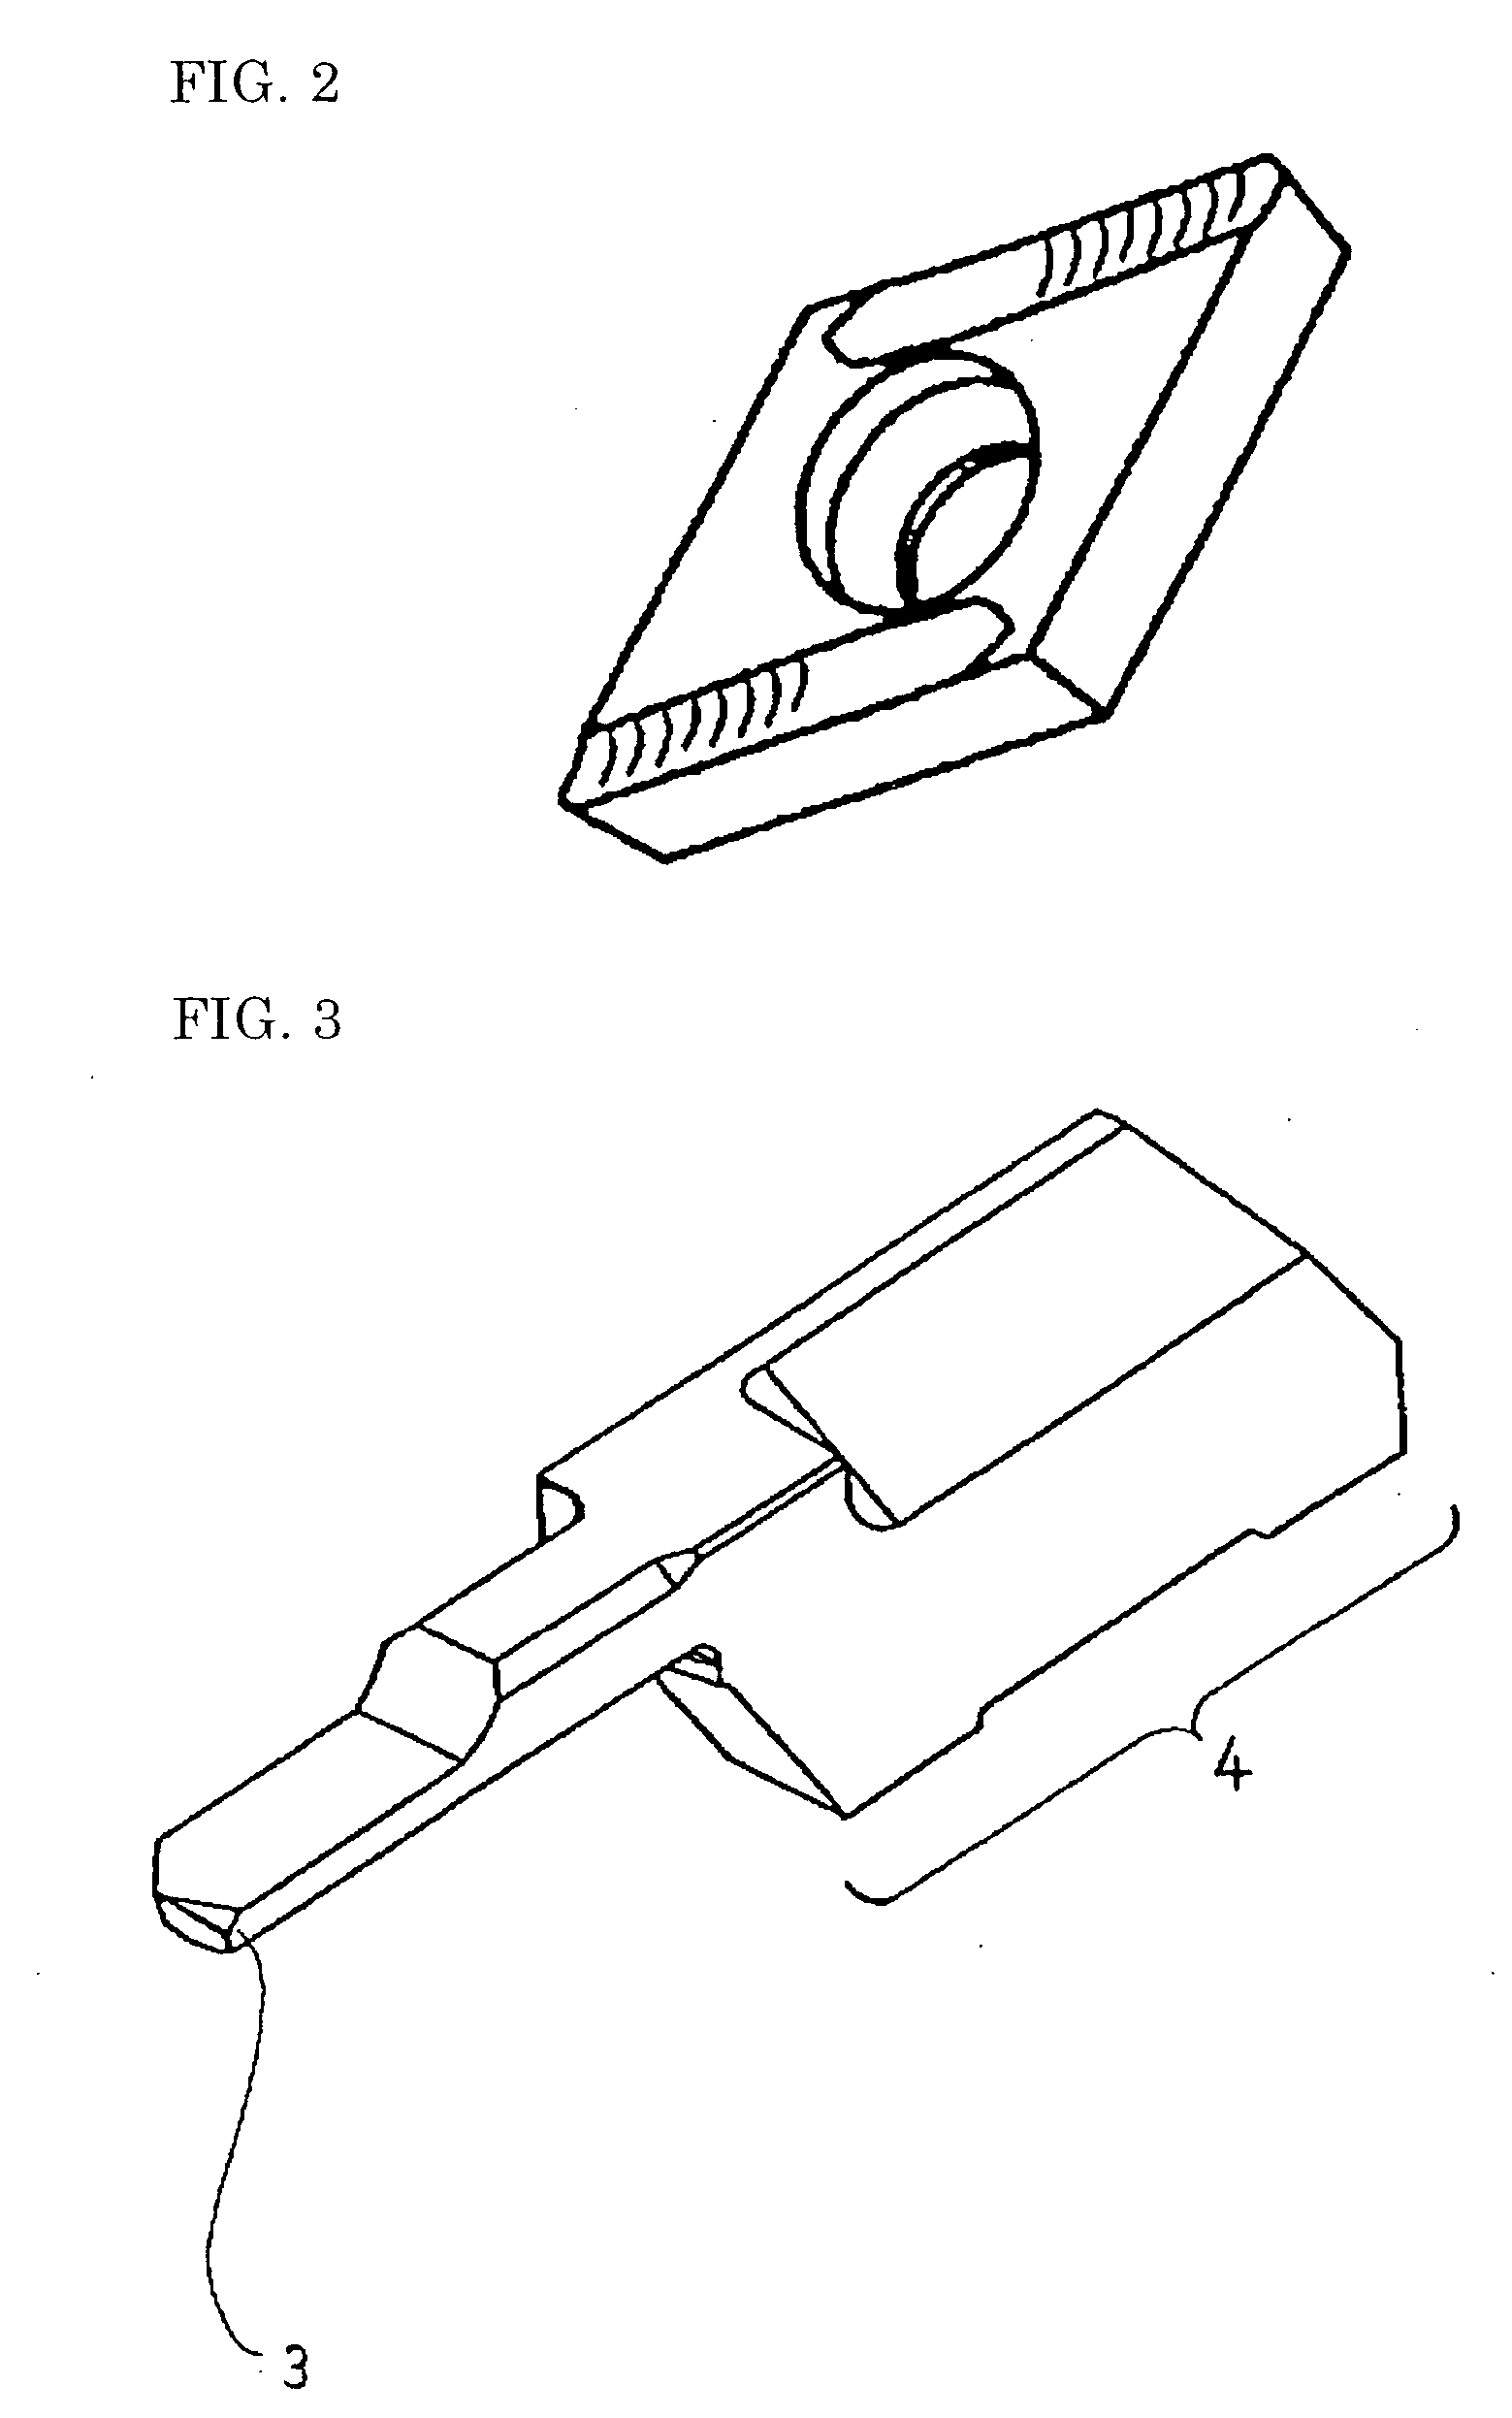 Cutting tool coated using PVD process